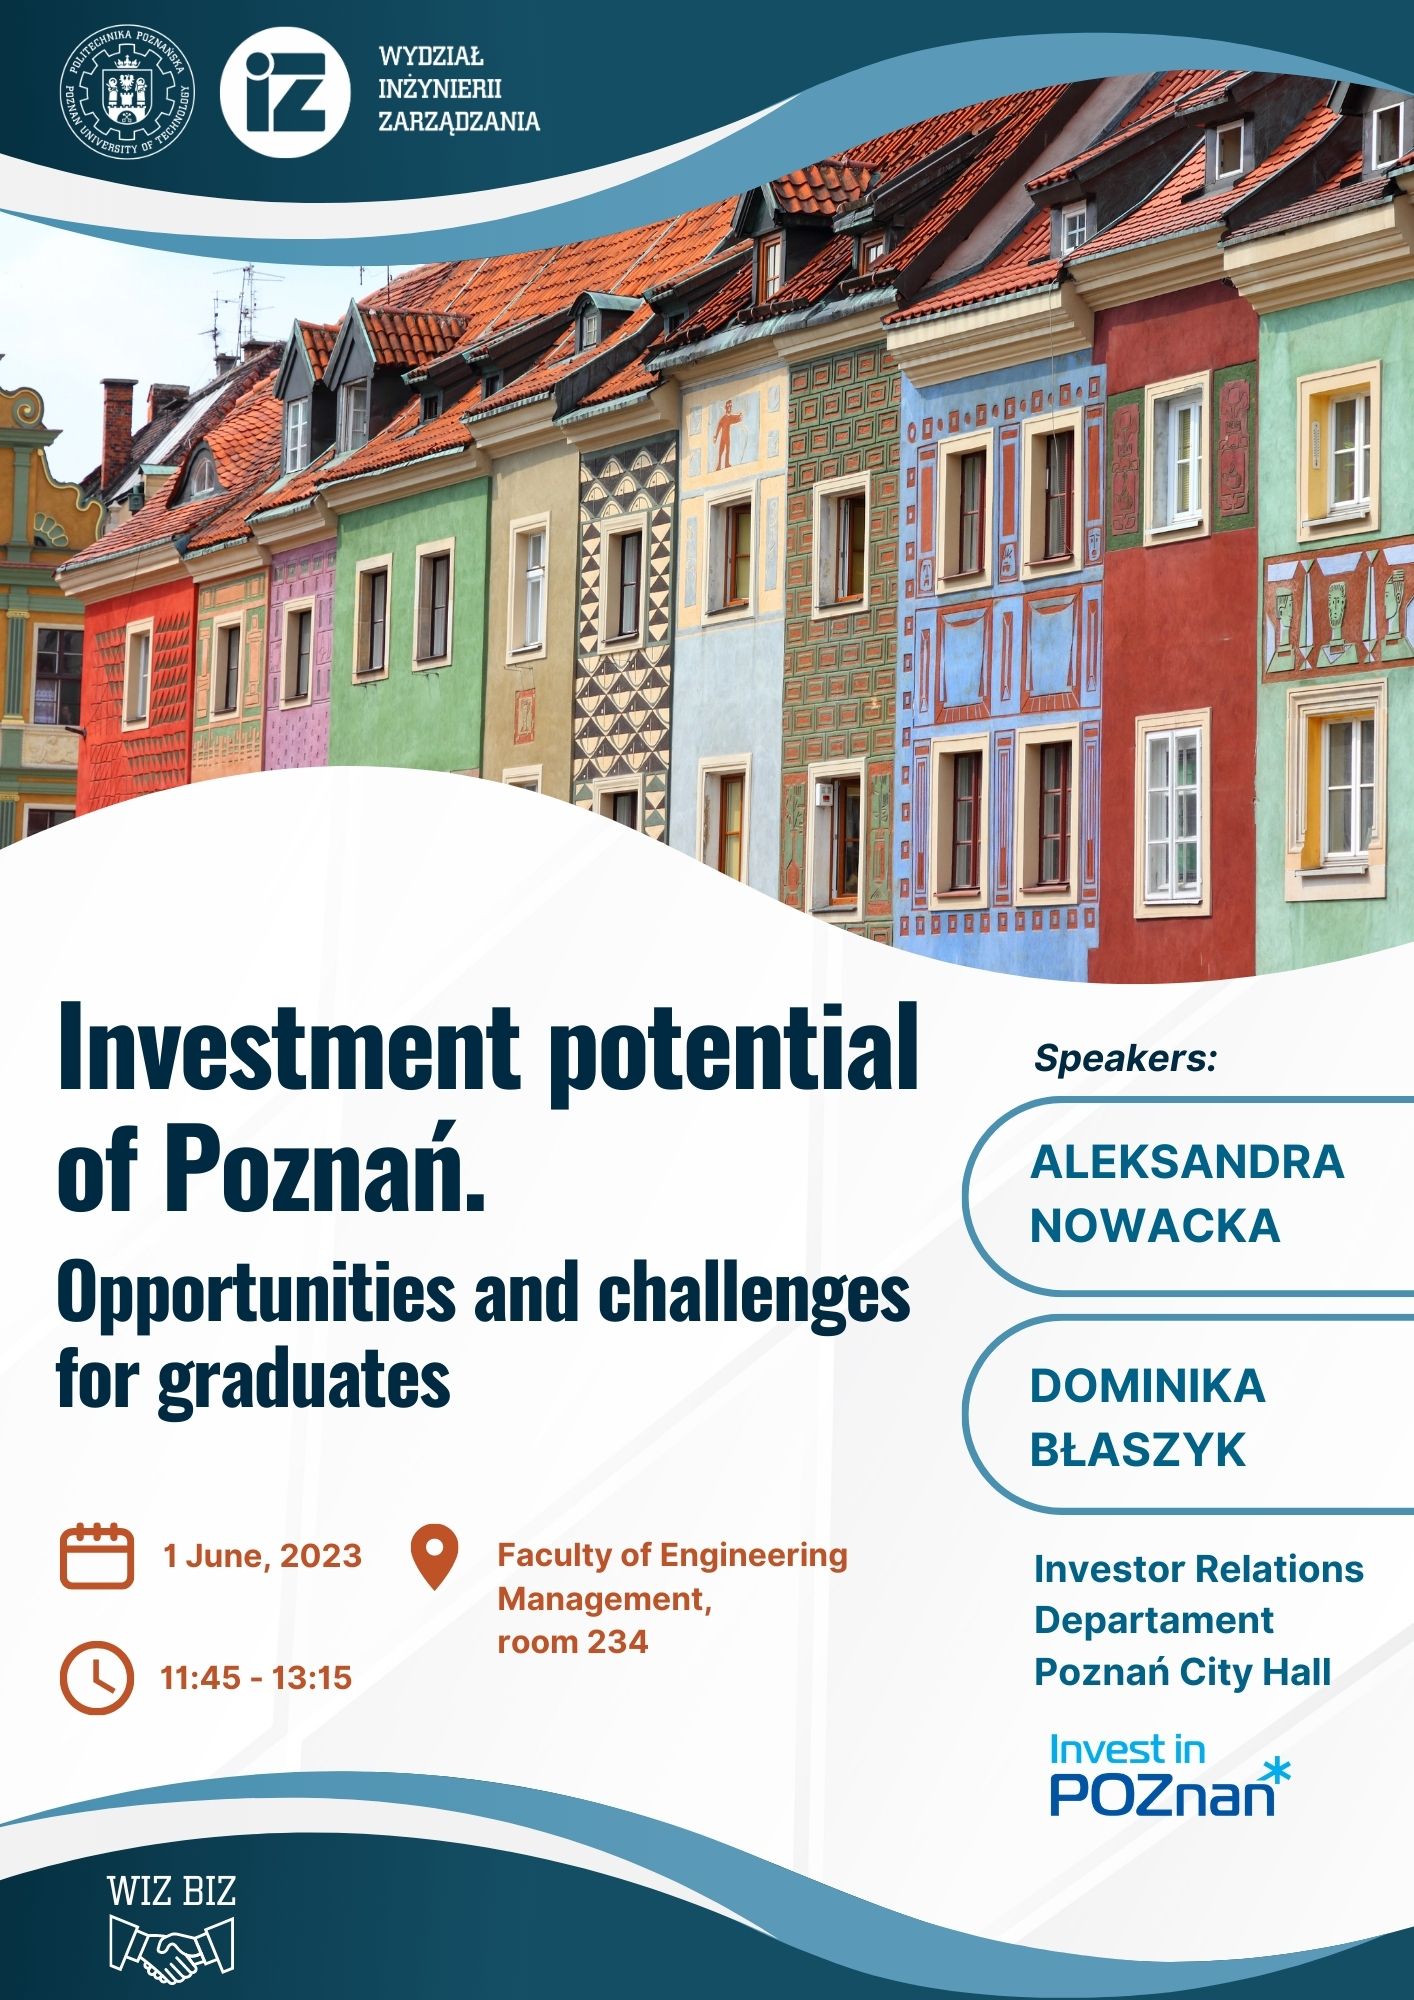 Topic: Investment potential of Poznań. Opportunities and challenges for graduates Speakers: Aleksandra Nowacka, Dominika Blaszyk - Investor Relations Department Poznań City Hall 